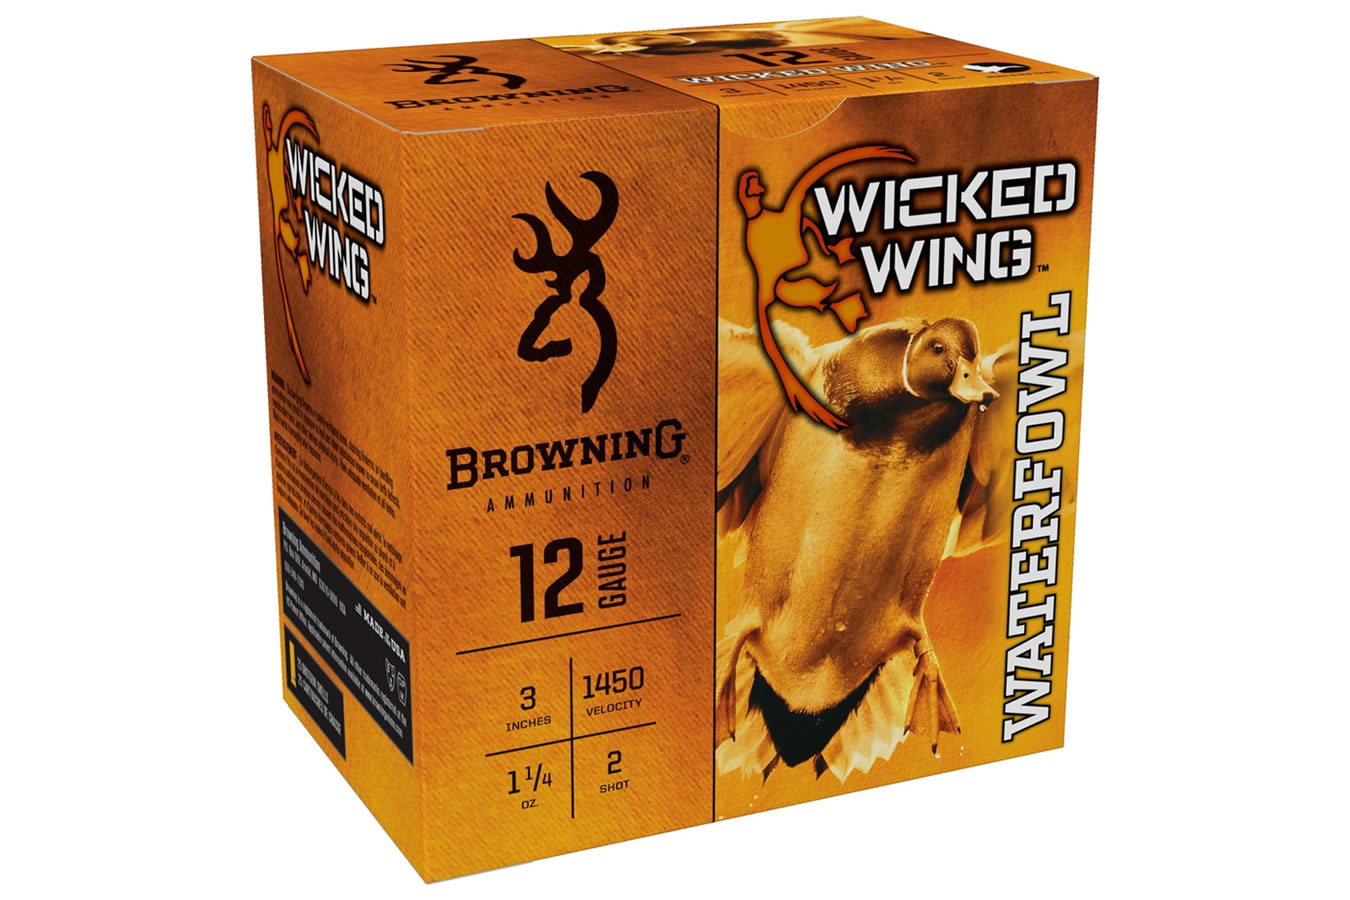 BROWNING AMMUNITION 12 GA 3 IN 1-1/4 OZ 2 WICKED WATERFOWL